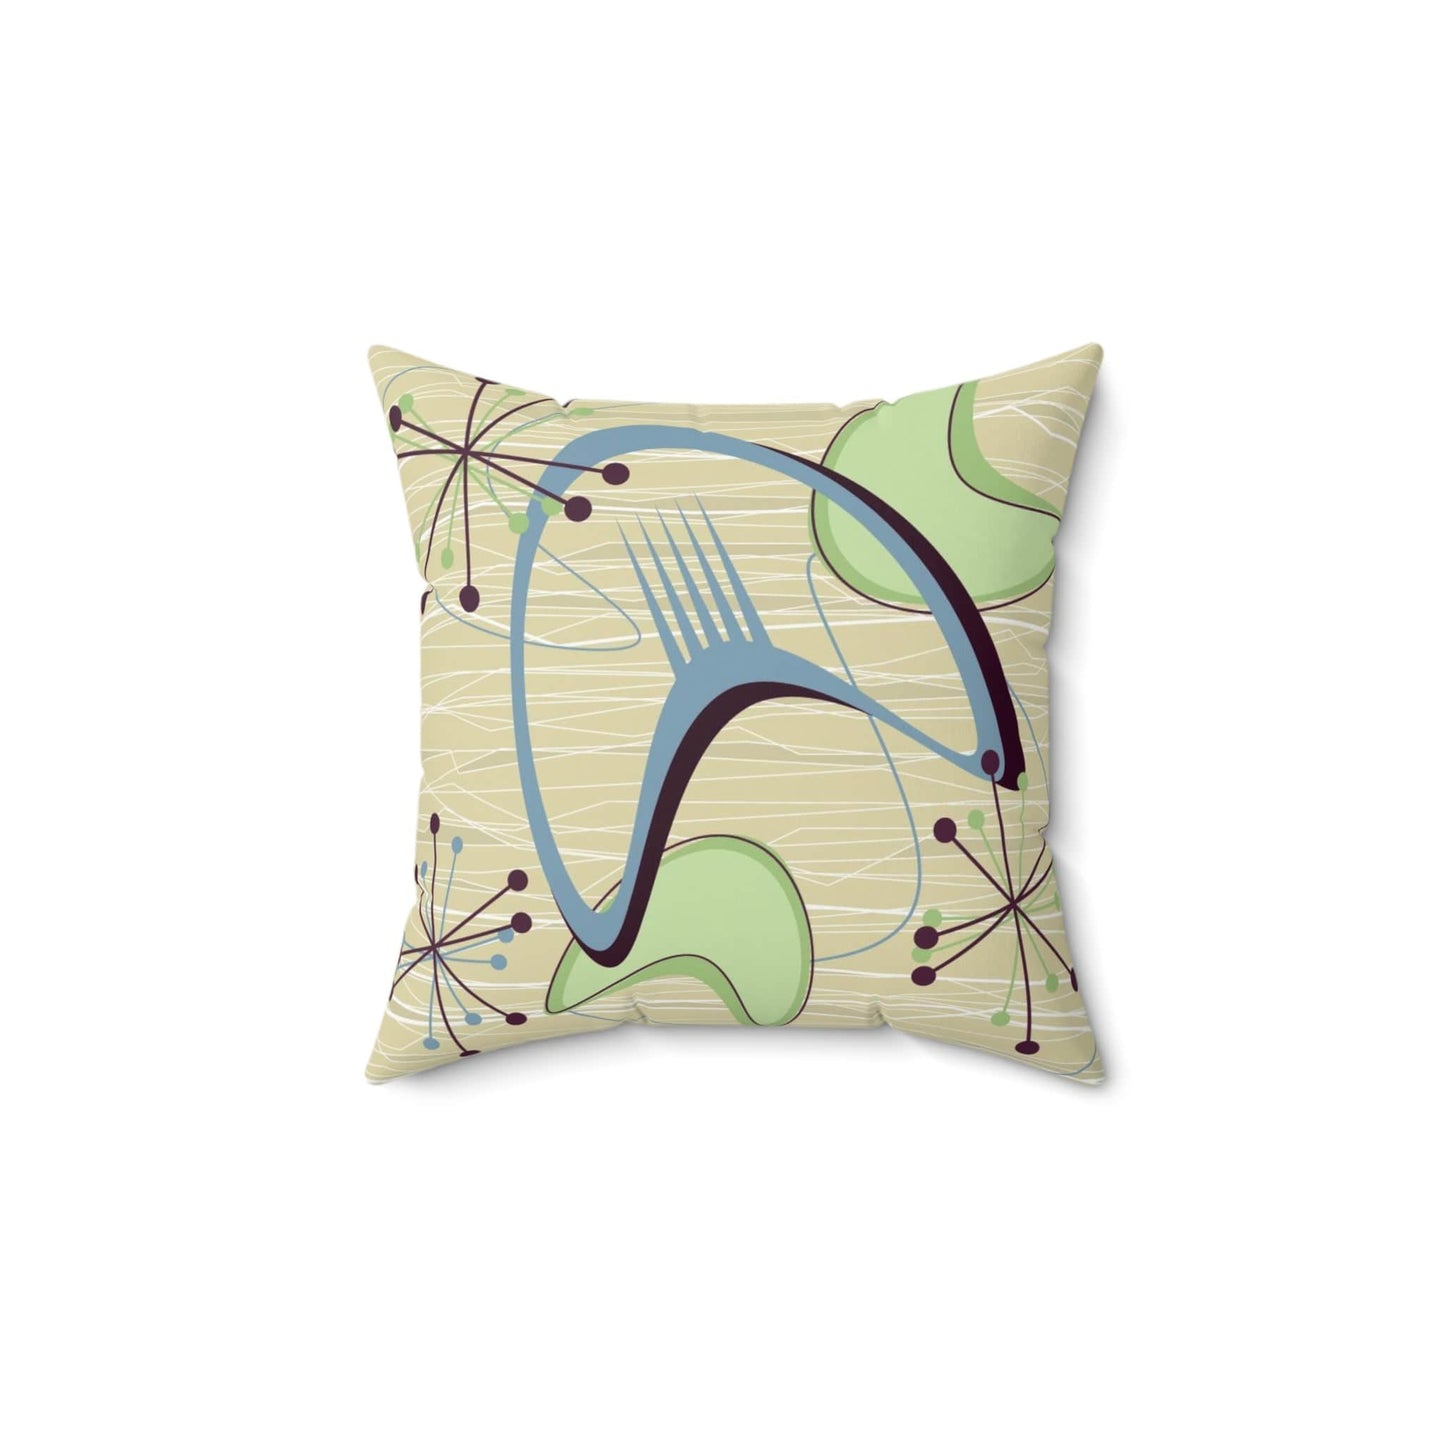 Printify 1950s Atomic Boomerang Mid Century Modern Throw Pillow in Retro Vintage Beige, Blue, Green Geometric Starbursts, MCM Abstract Accent Pillow Home Decor